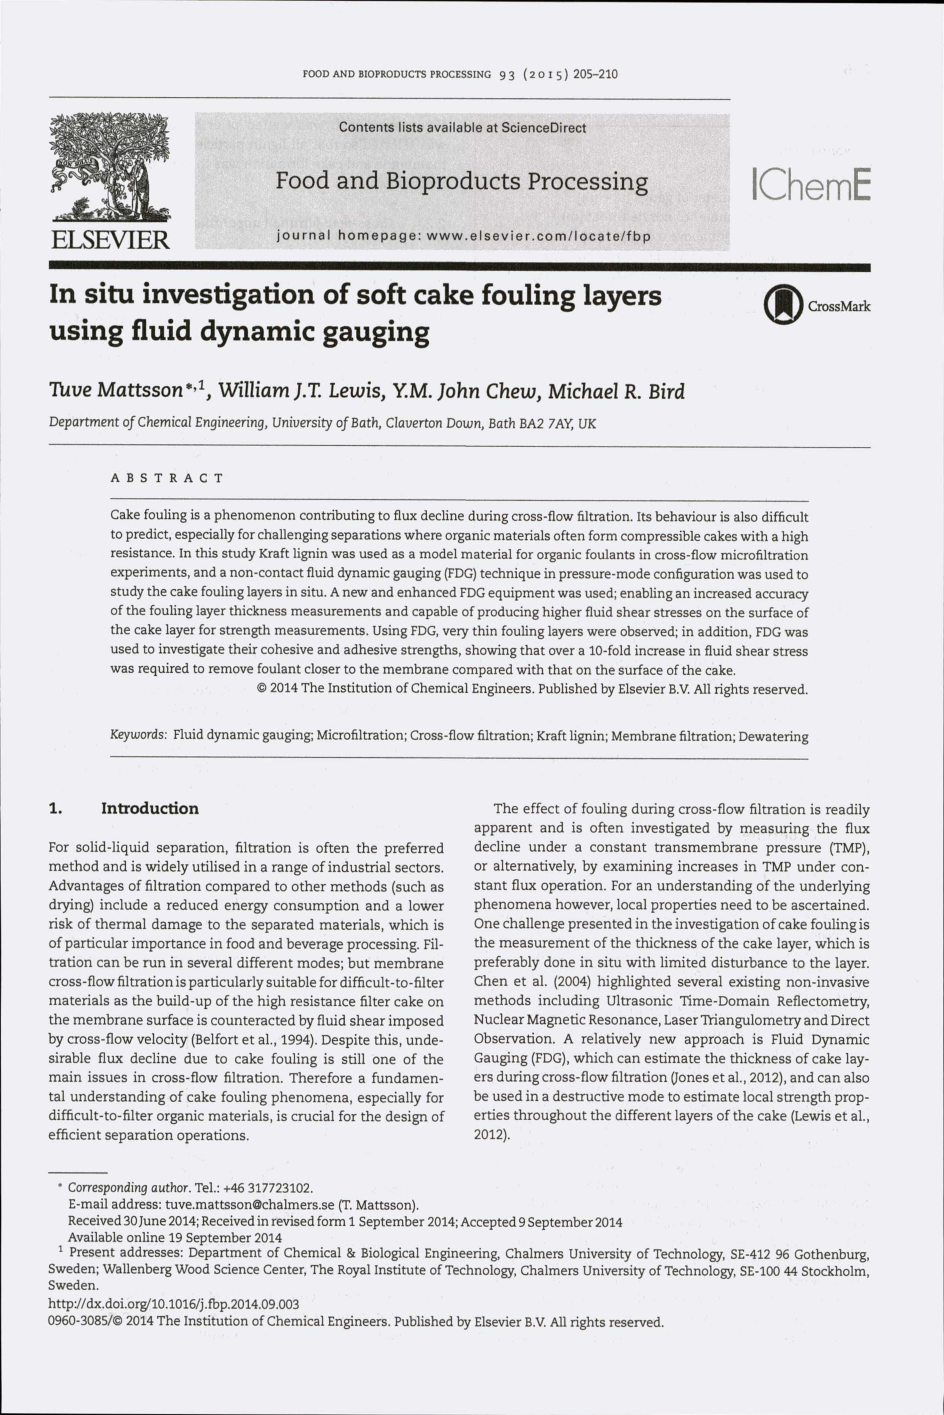 In situ investigation of soft cake fouling layers using fluid dynamic gauging